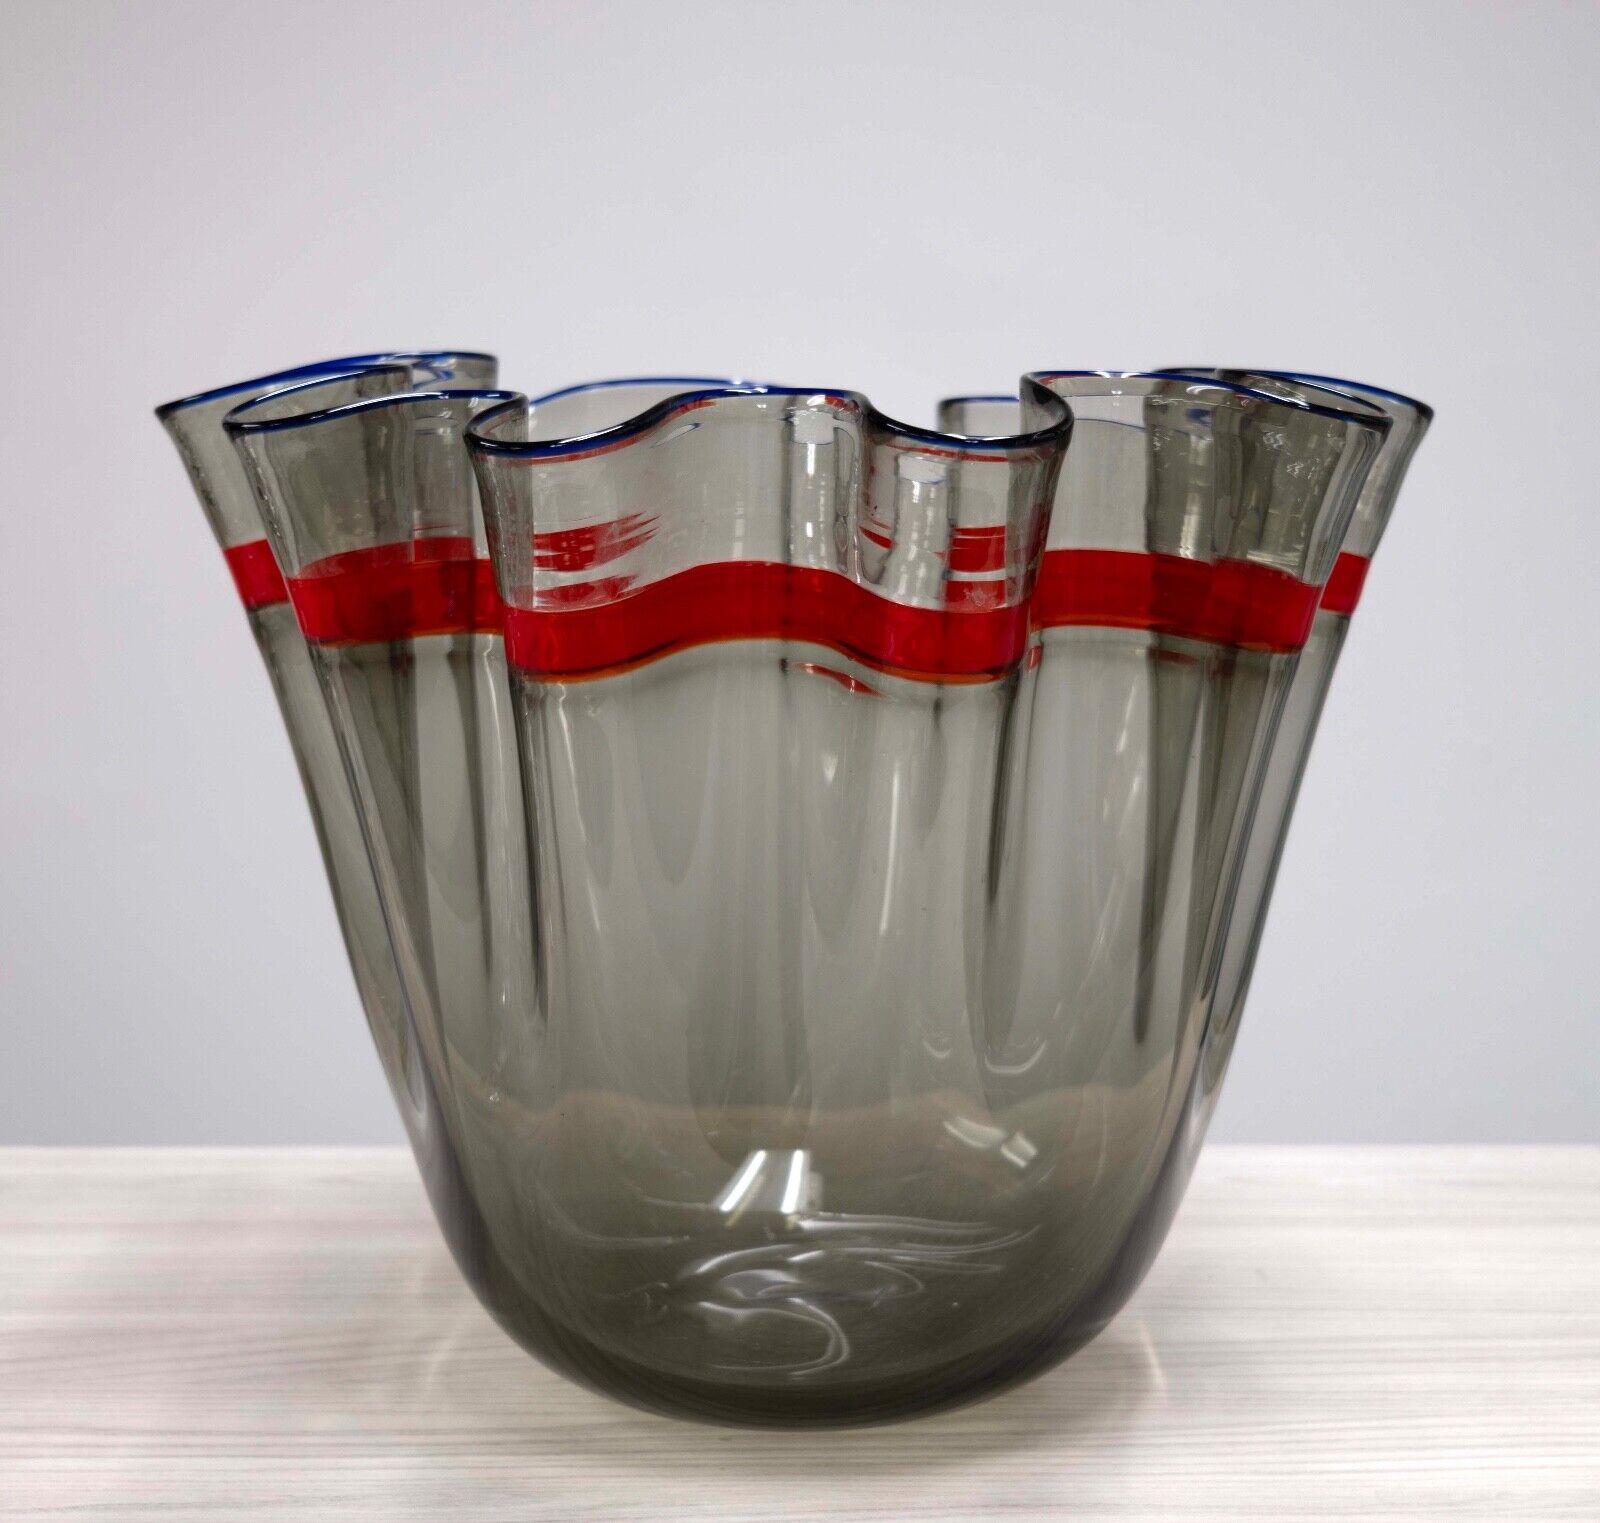 Late 20th Century Large Alvise Fazzoletto Smoked Red Stripe Handkerchief Bowl Vessel 1980s For Sale